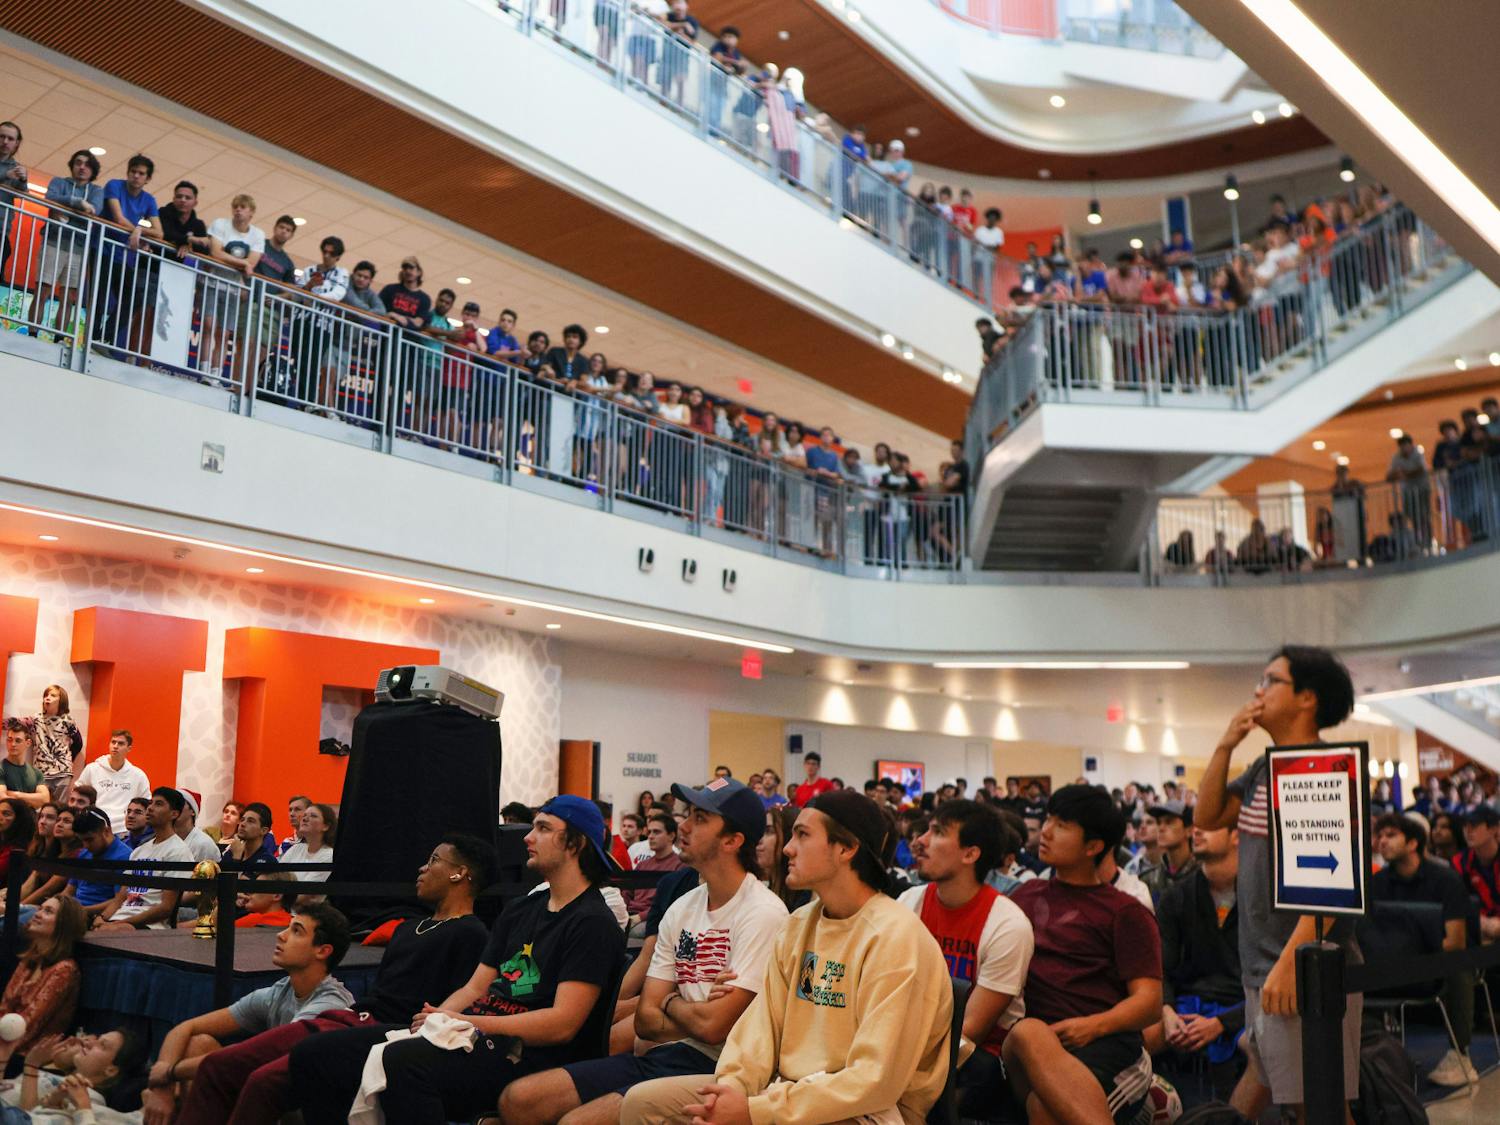 Spectators fill three stories of the Reitz Union to watch the World Cup match between the United States and the Netherlands Saturday, Dec. 3, 2022. 